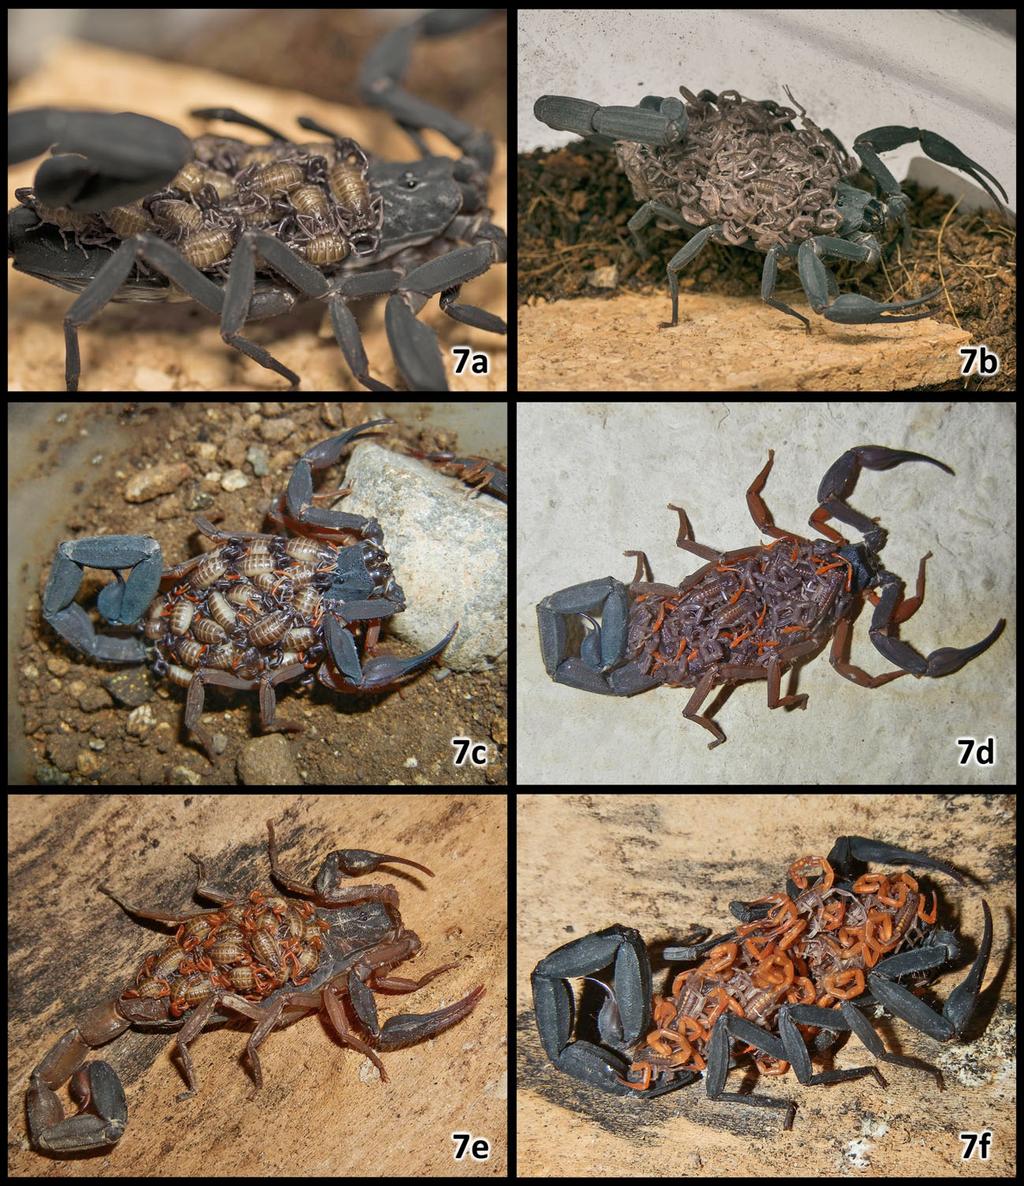 10 Euscorpius 2017, No. 252 Figure 7: Comparison of live females and their litters, photographed in captivity: a b) Centruroides caribbeanus sp. n.